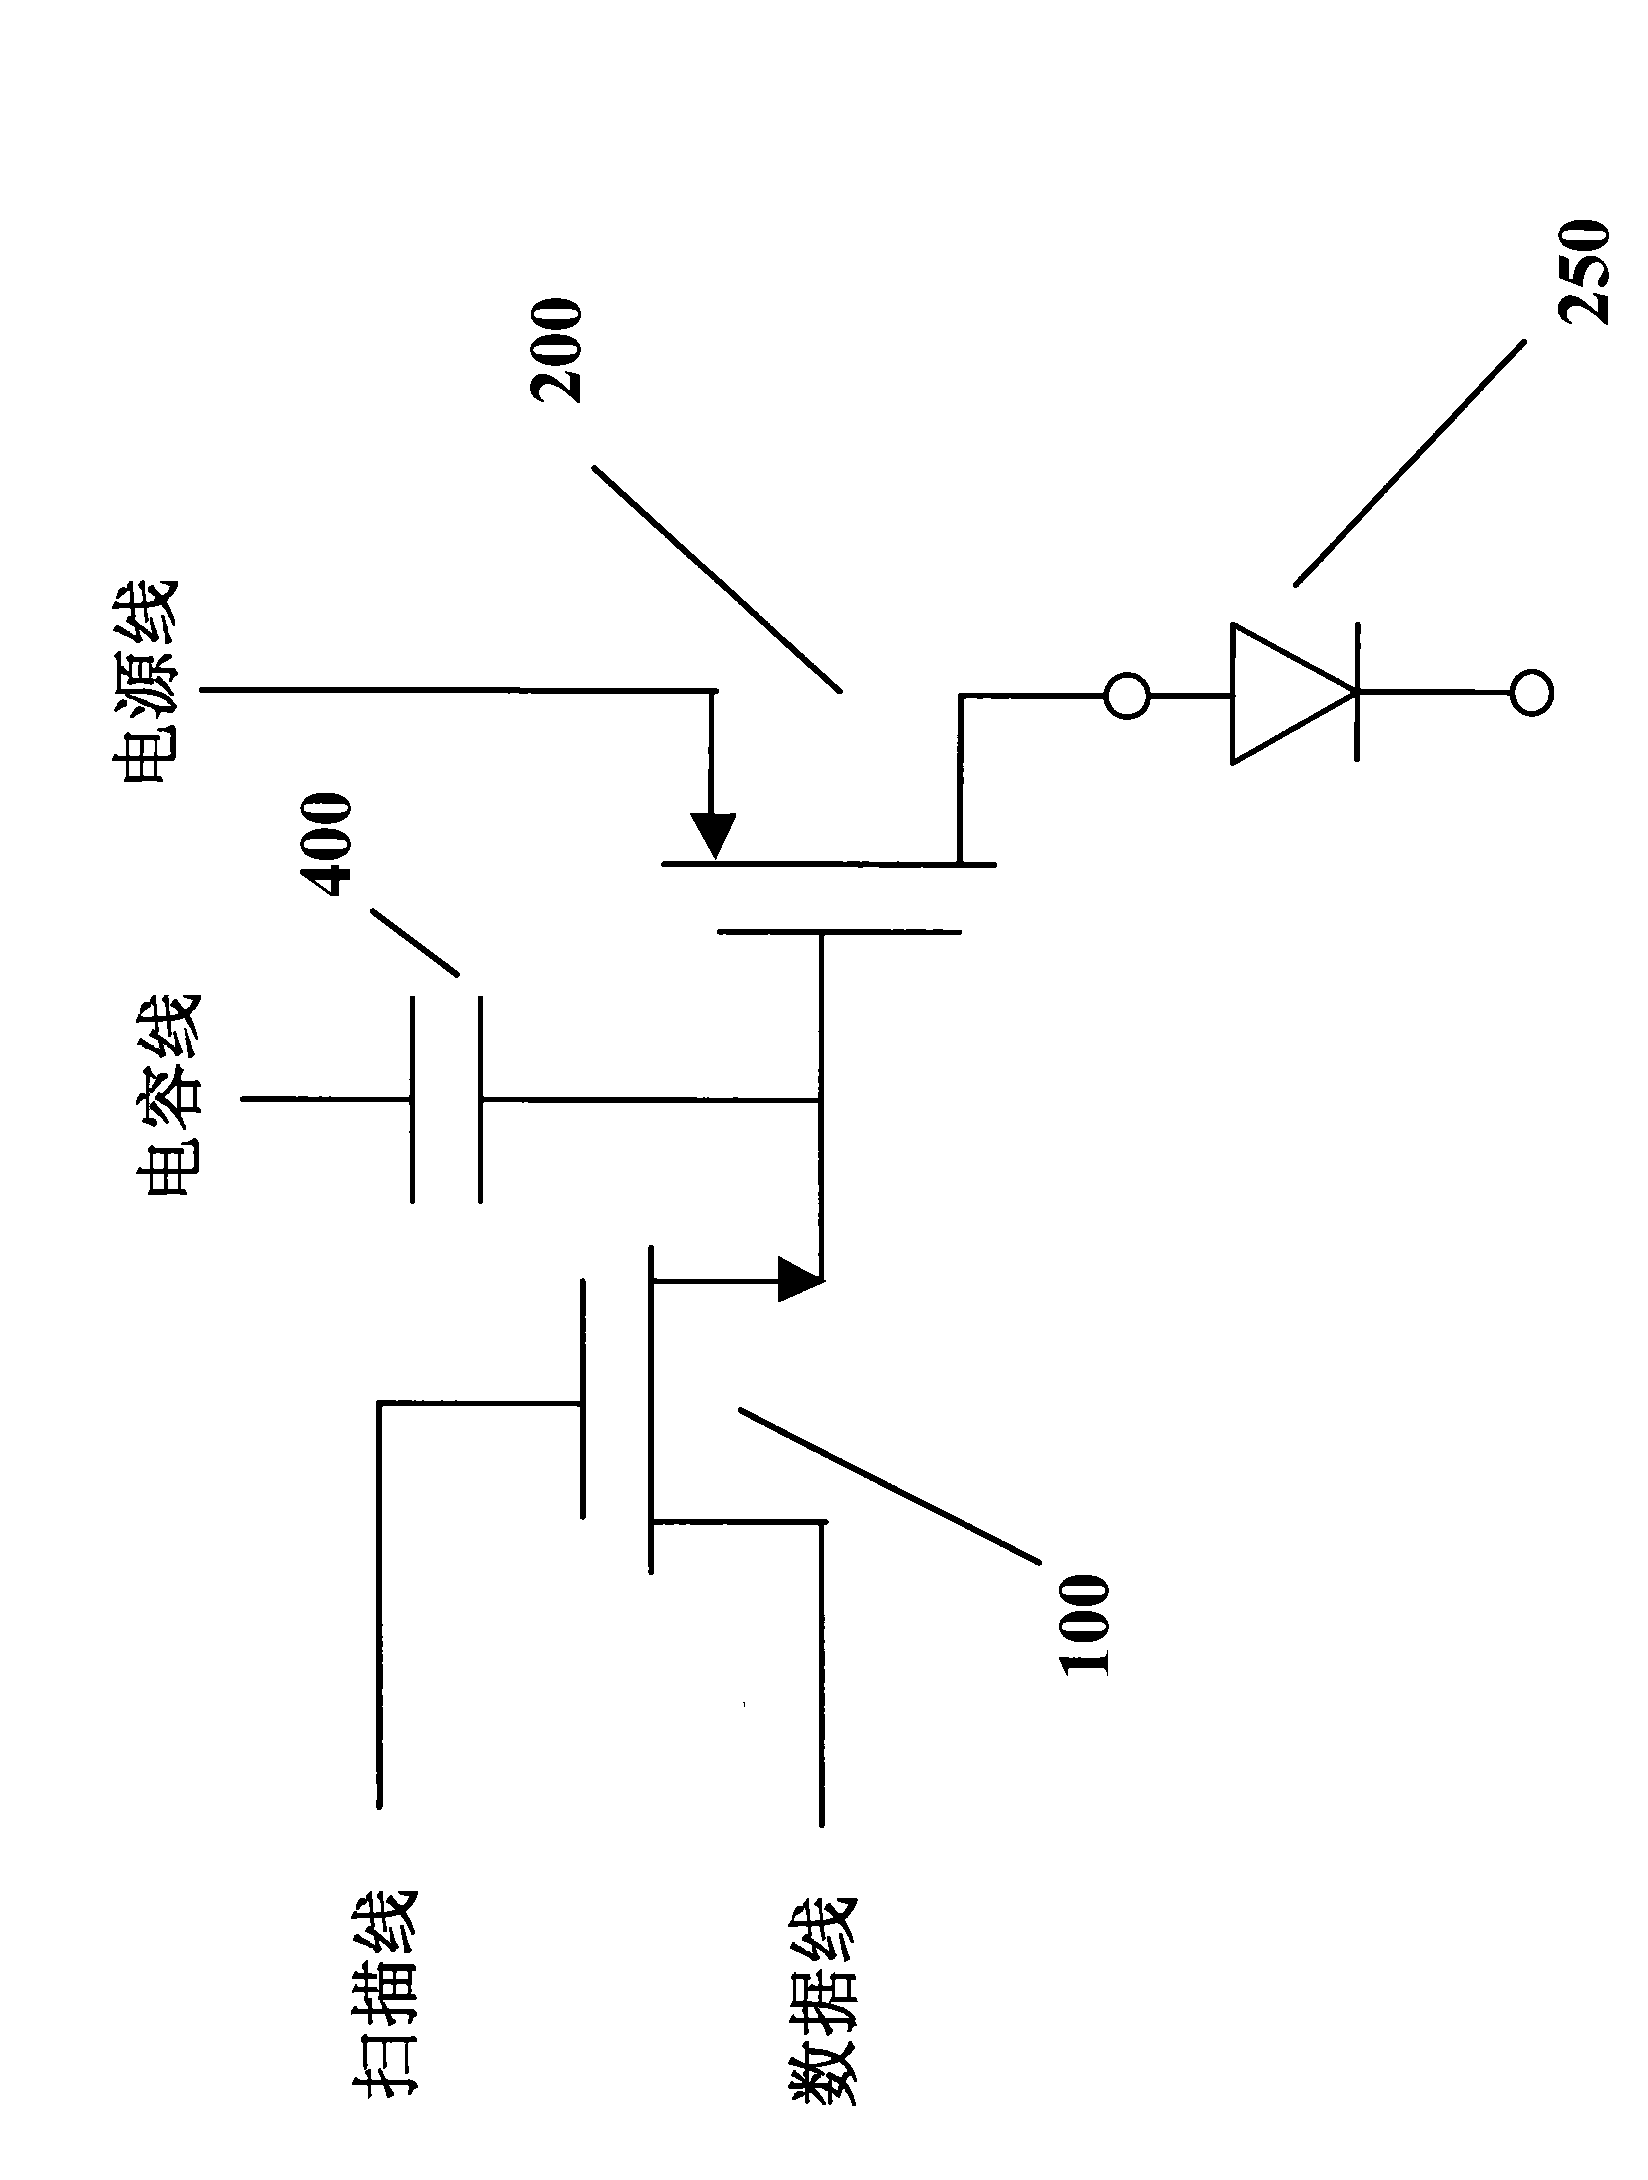 Image display system and manufacture method thereof